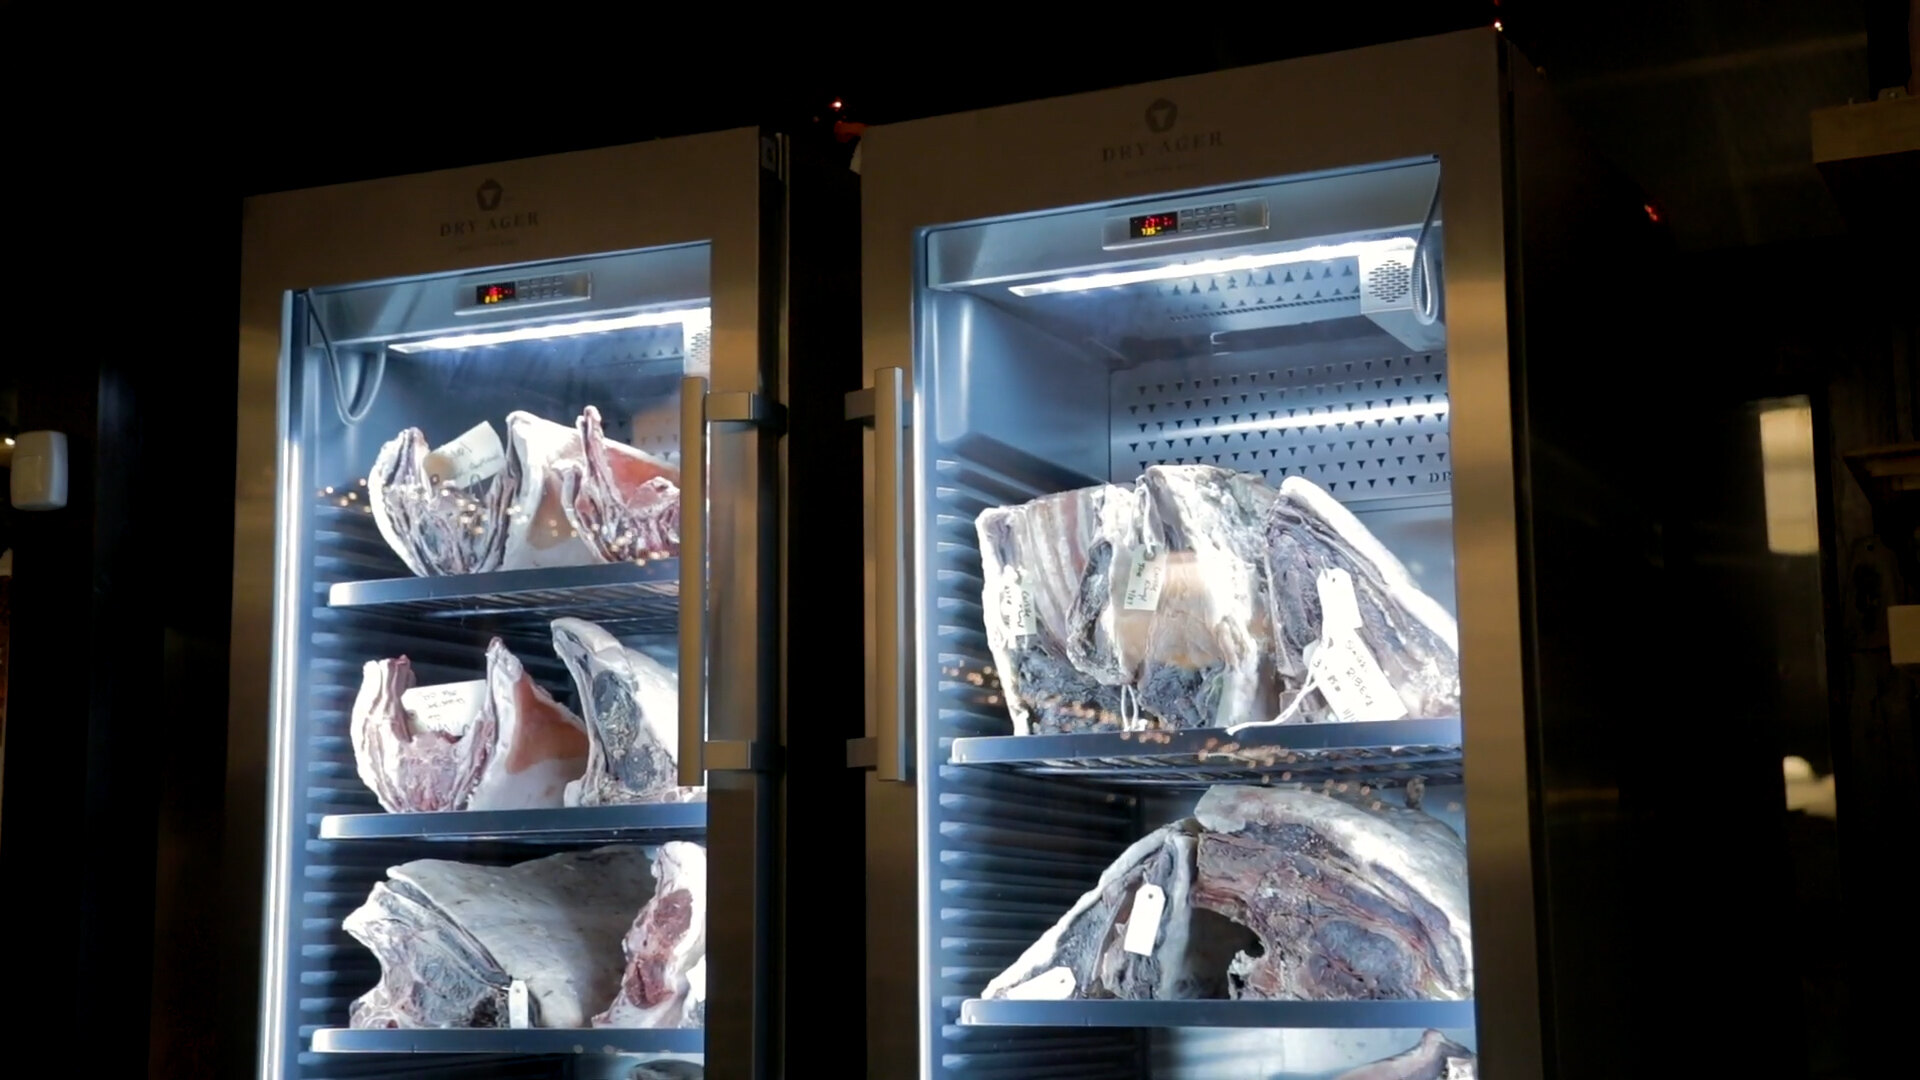 DRY AGER Commercial Aging Cabinet - Use DISCOUNT CODE SHIPSFREE